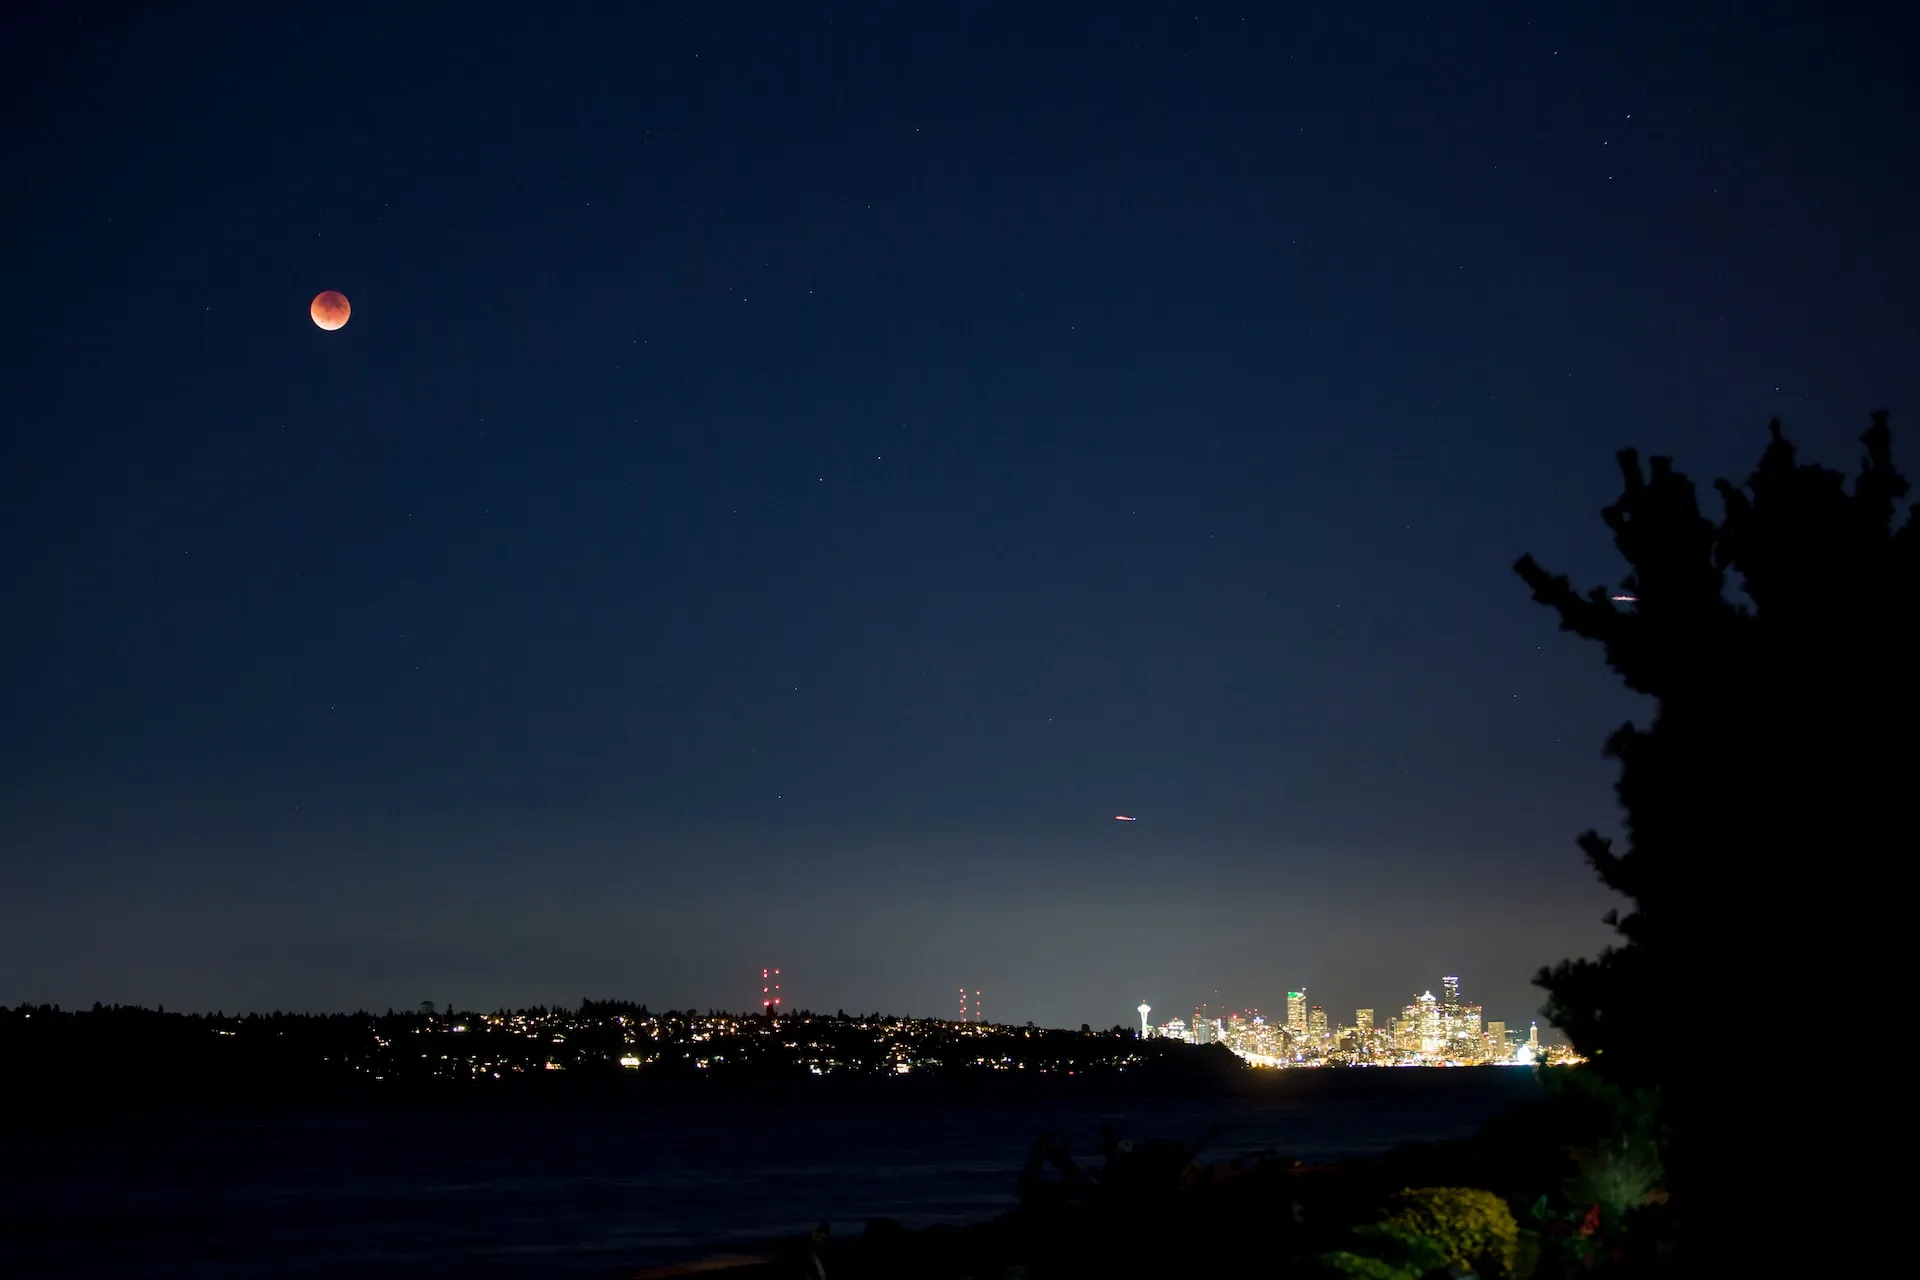 The image shows a group of people watching a lunar eclipse over a city skyline.